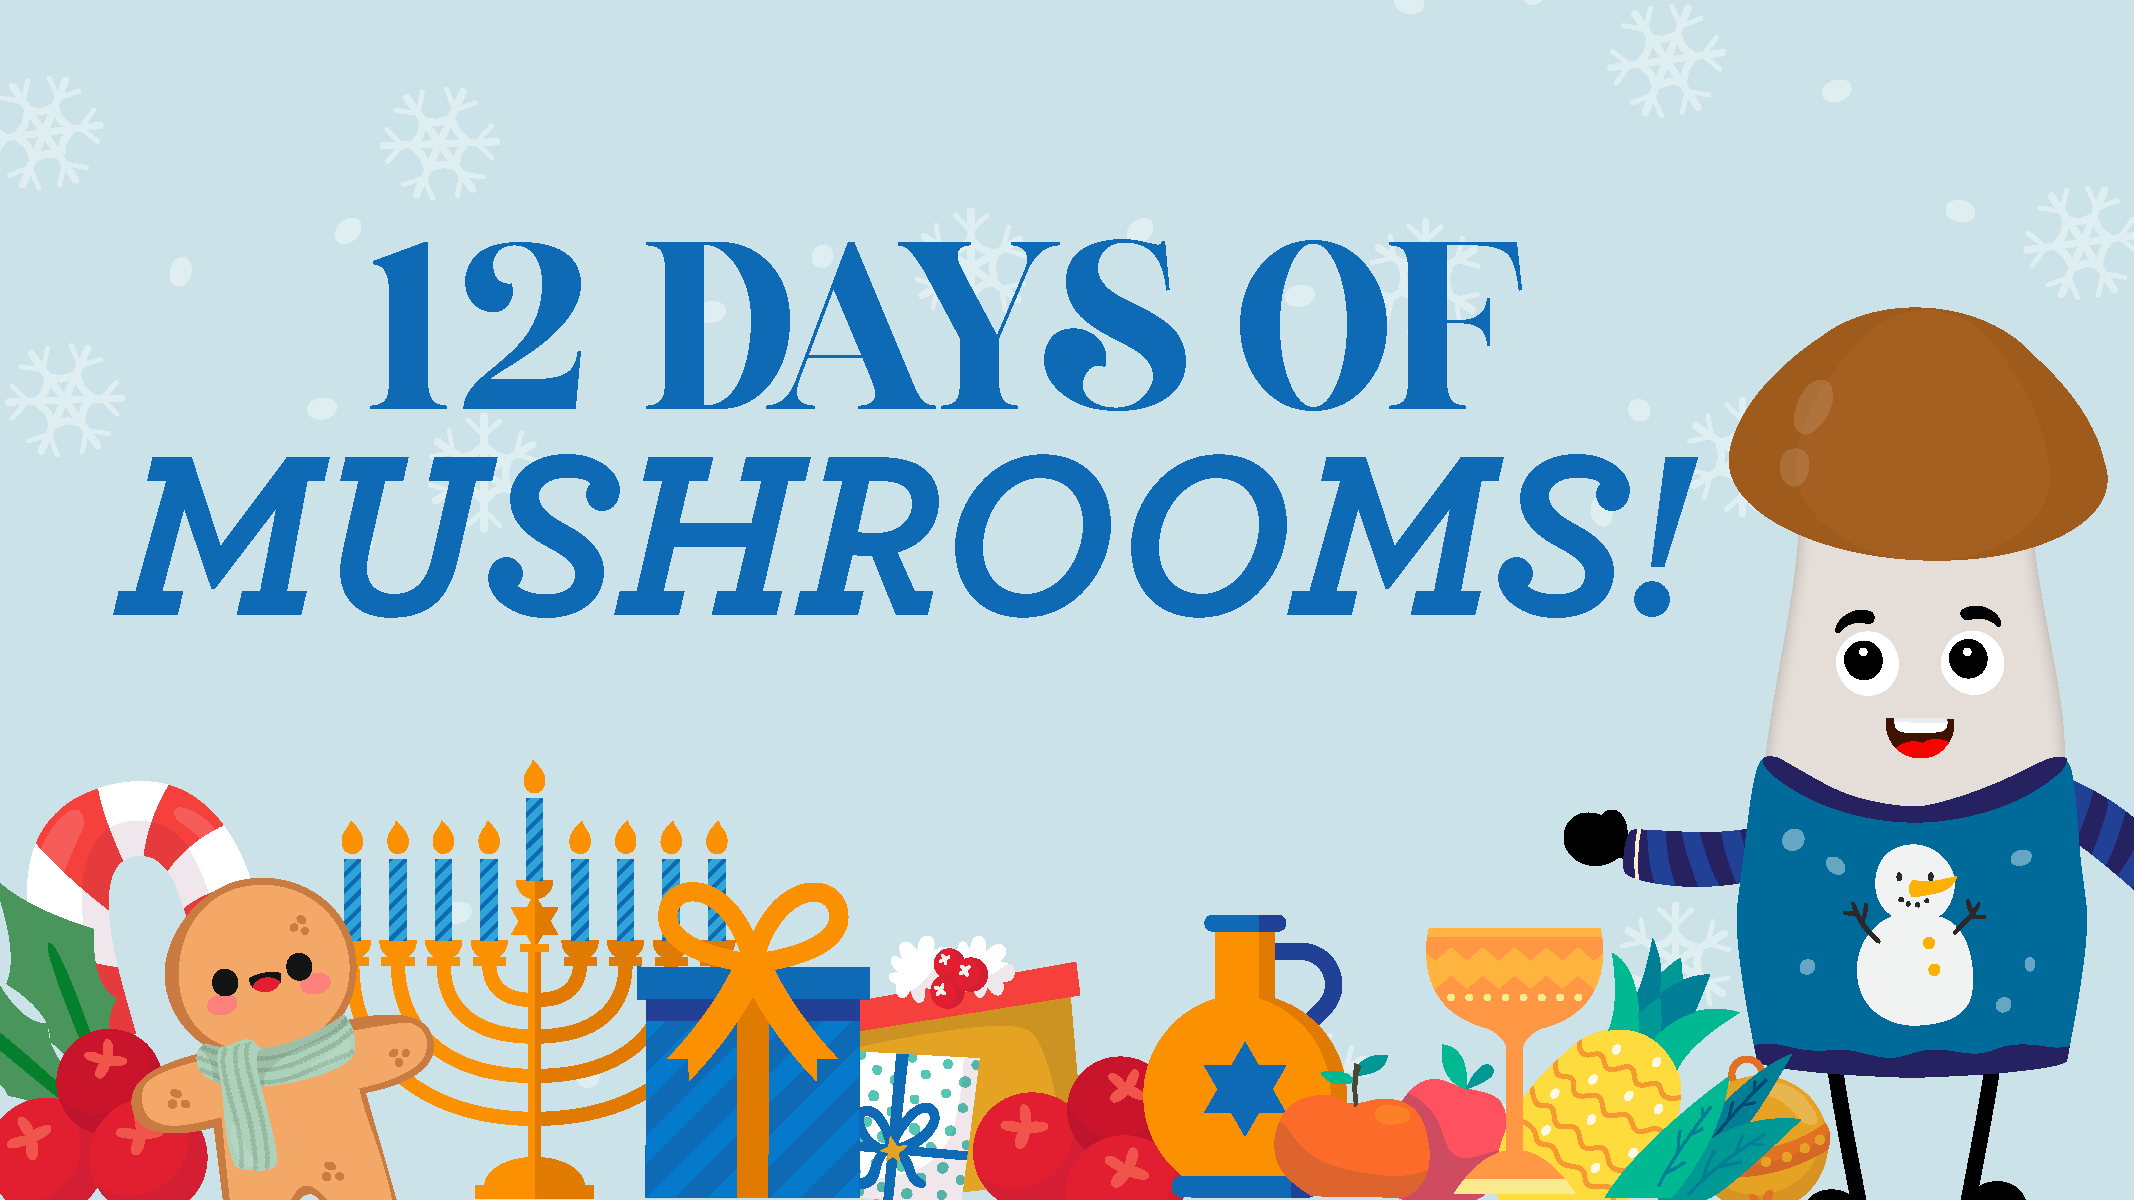 12 Days of Mushrooms is Back! - The Mushroom Council